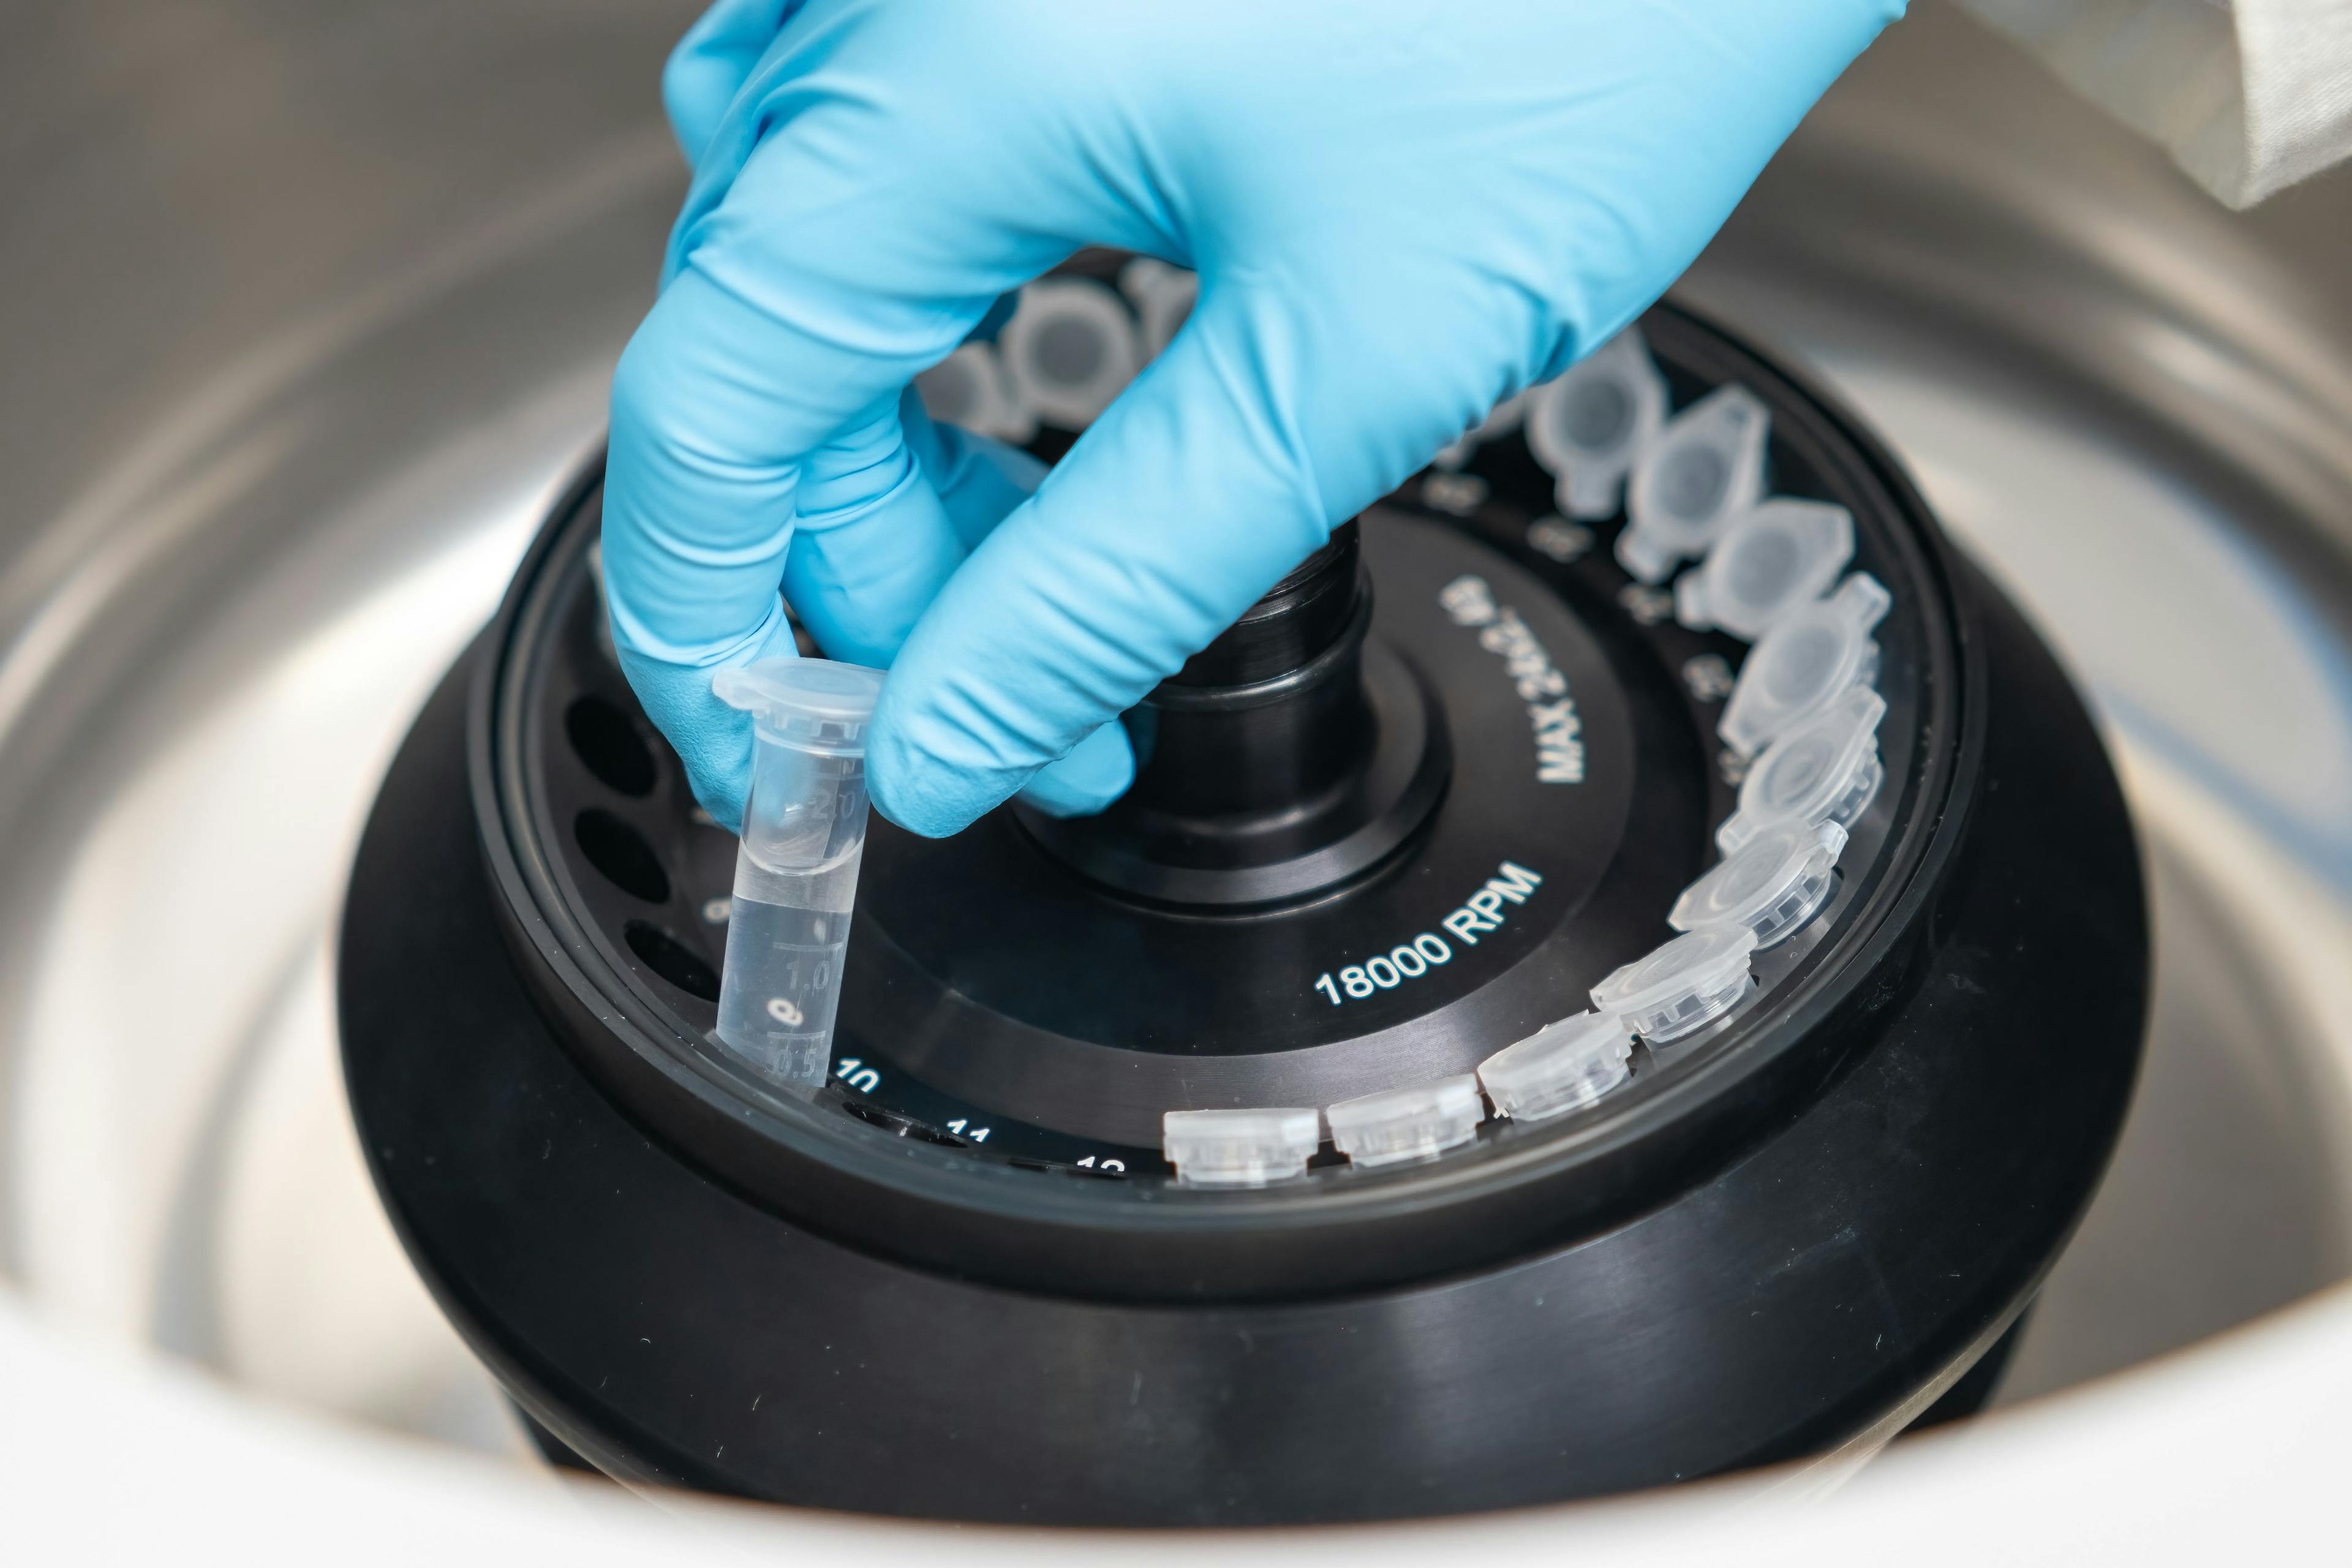 Scientist puts microcentrifuge tubes into centrifuge for phase separation. Metabolomic and lipidomic analysis in the analytical chemistry laboratory. | Image Credit: © vladim_ka - stock.adobe.com